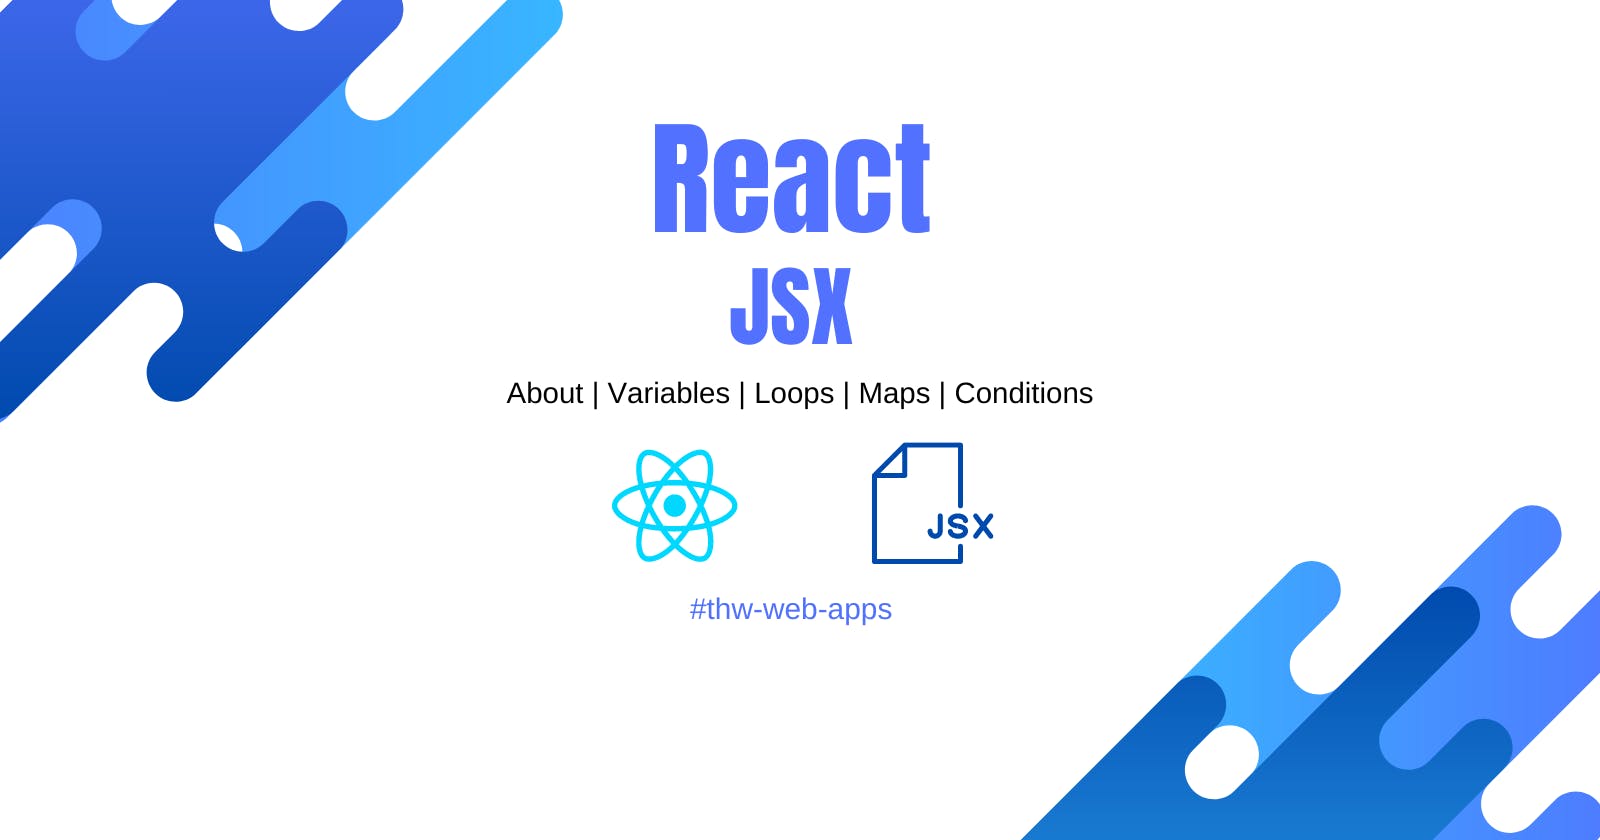 A Complete Guide To JSX